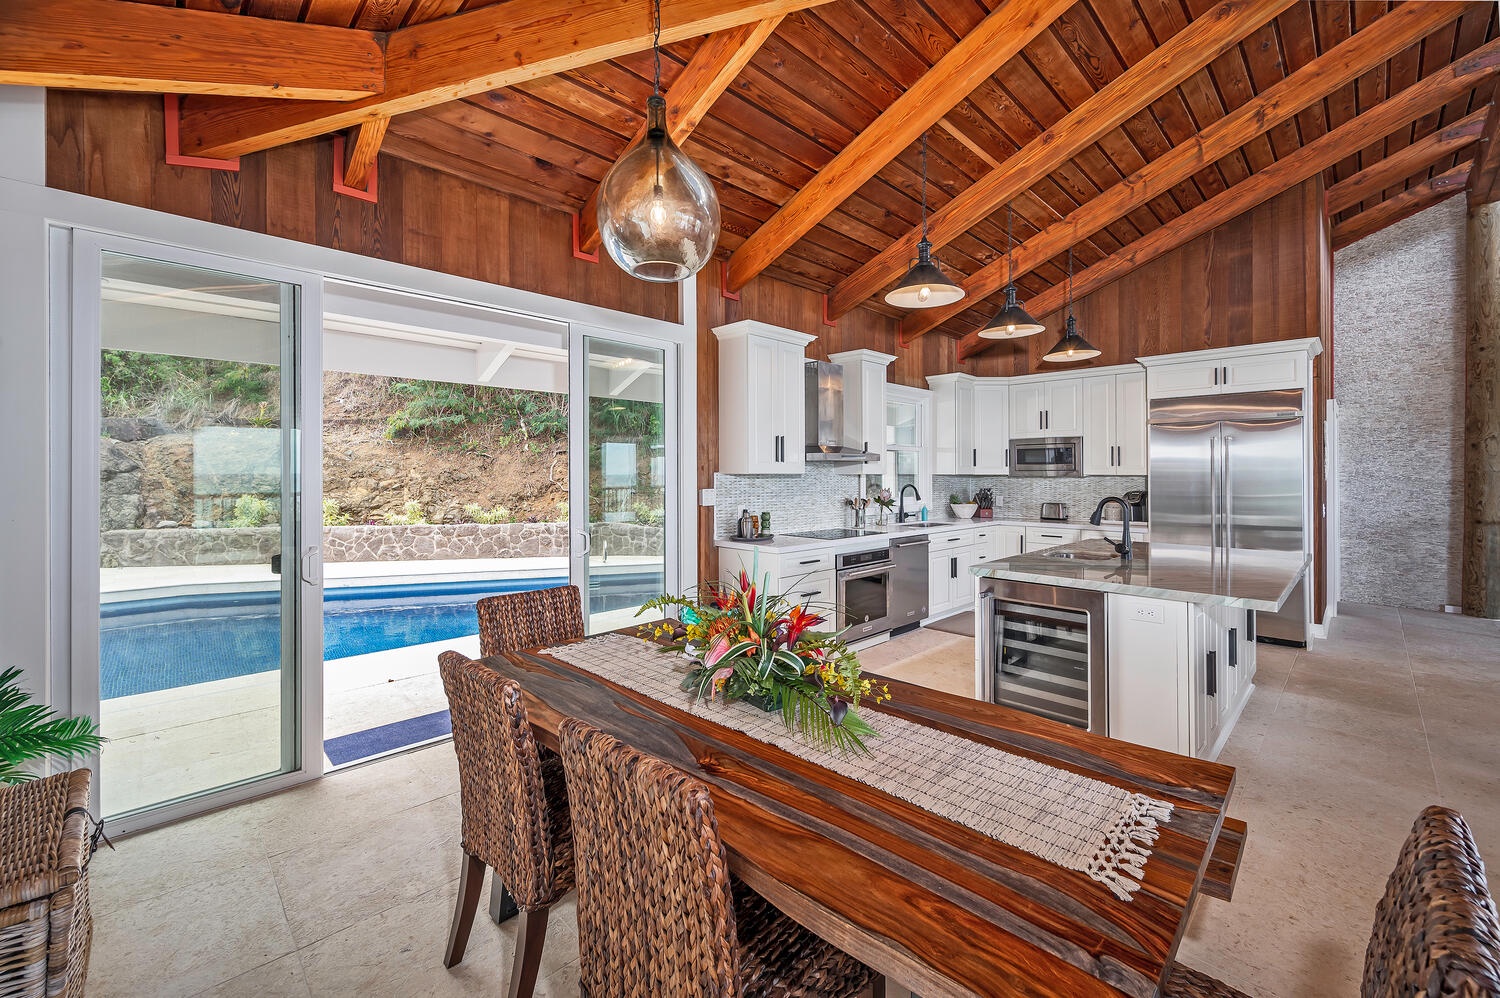 Kailua Vacation Rentals, Hale Lani - Dining and kitchen have pool views